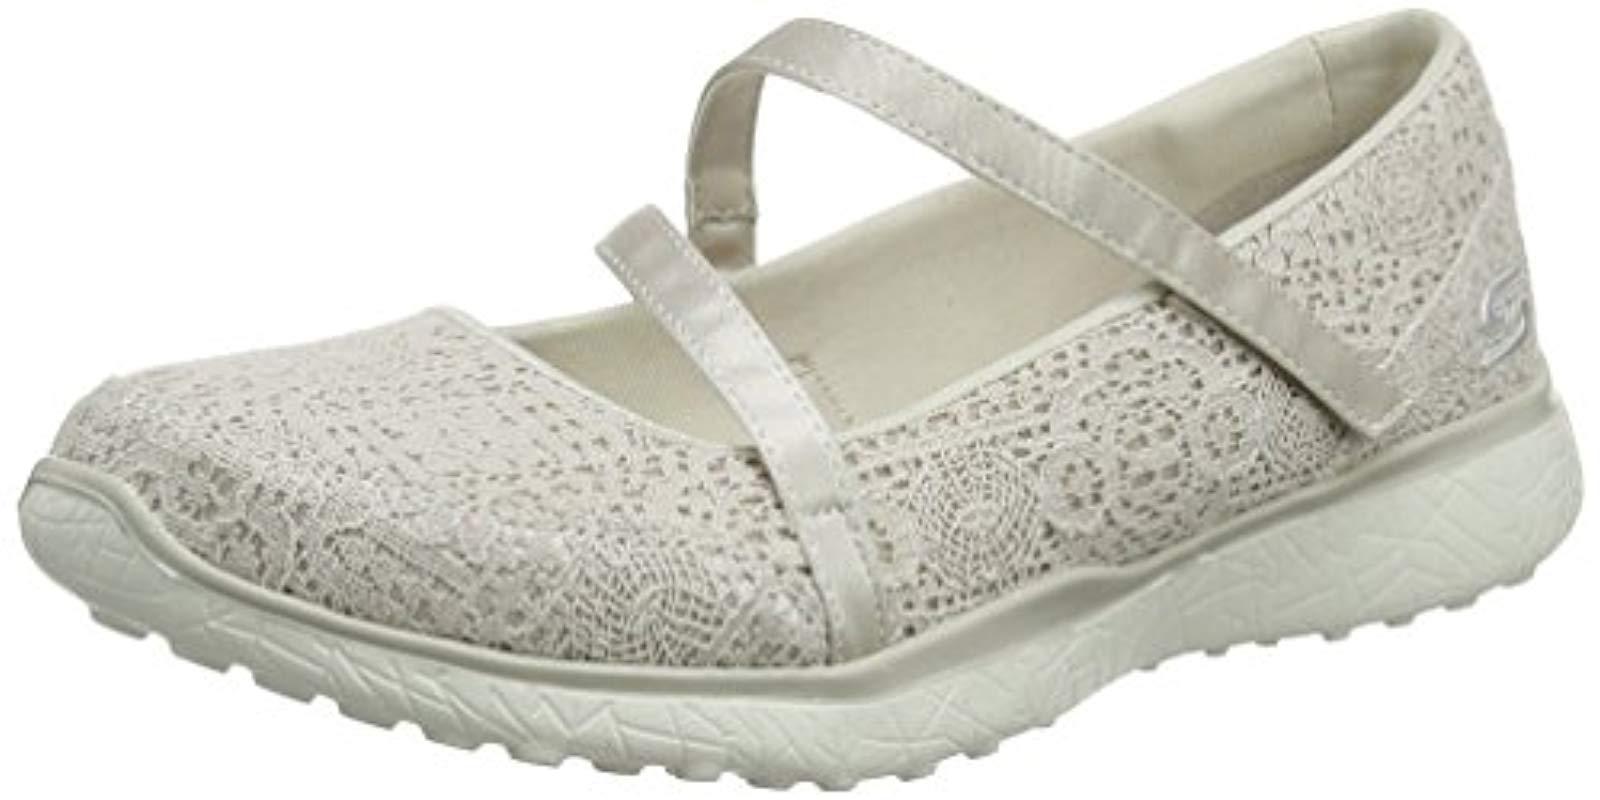 skechers microburst knot concerned mary jane